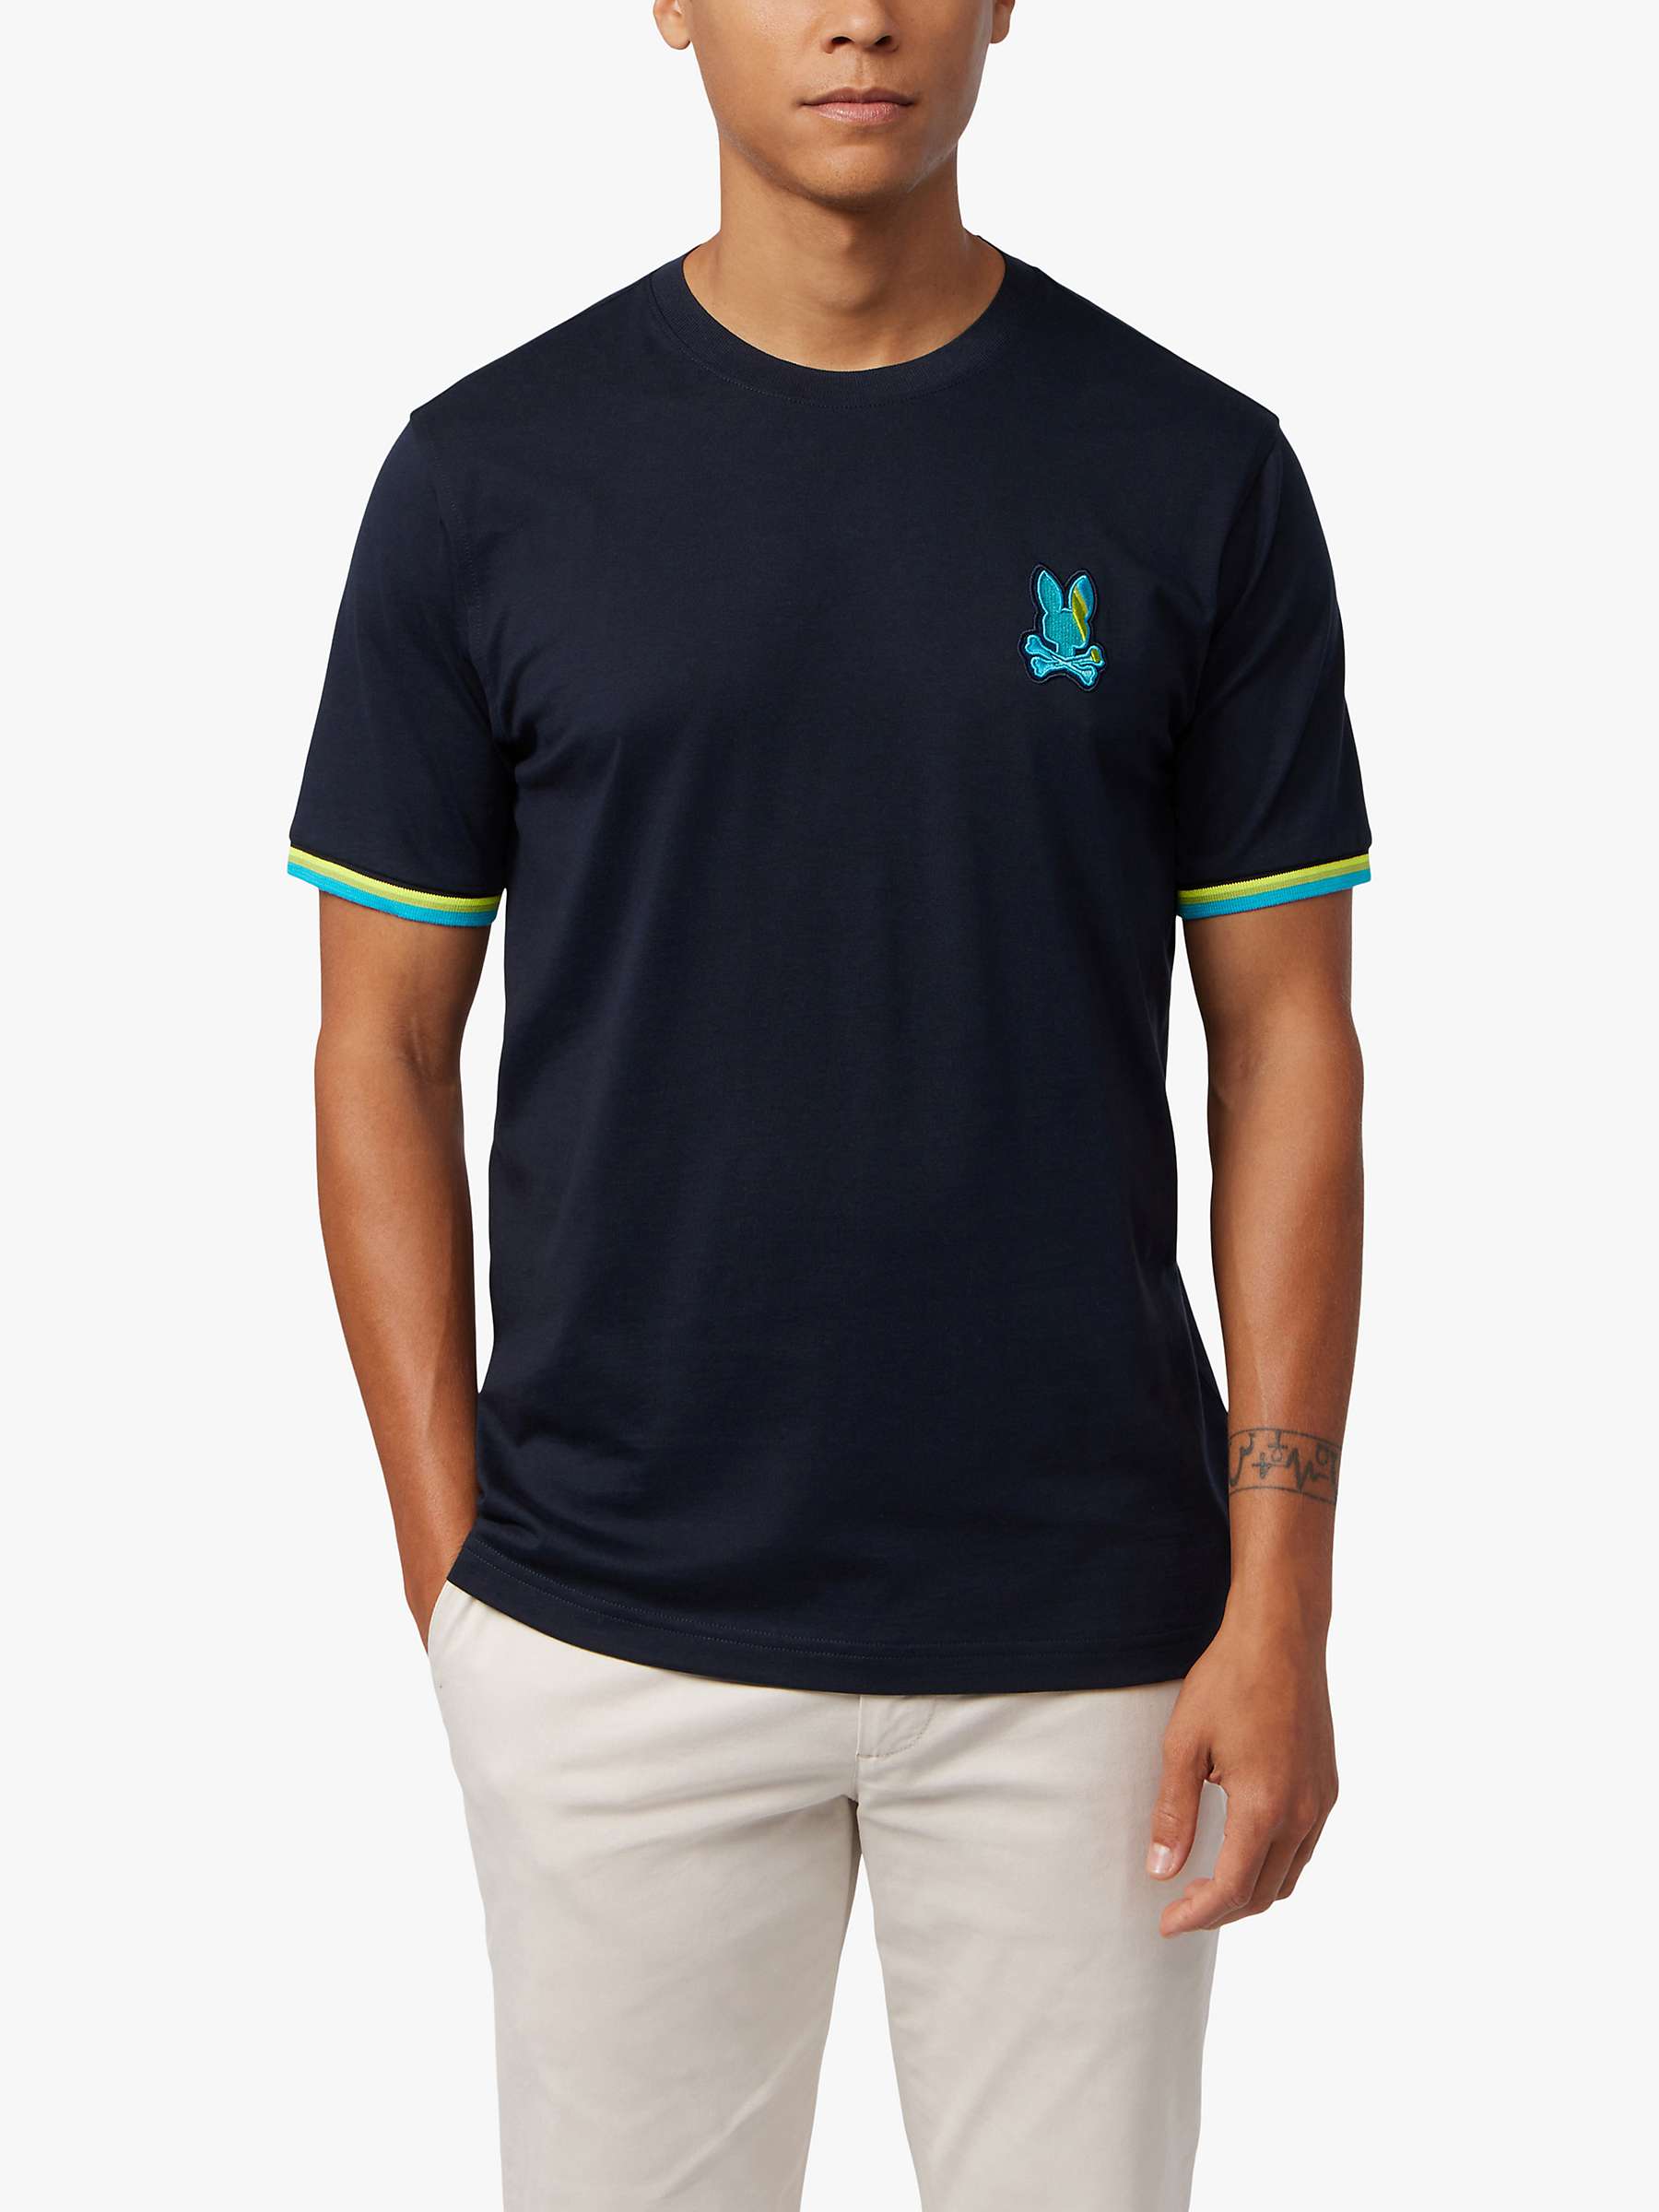 Buy Psycho Bunny Apple Valley Fashion T-Shirt, Navy/Multi Online at johnlewis.com